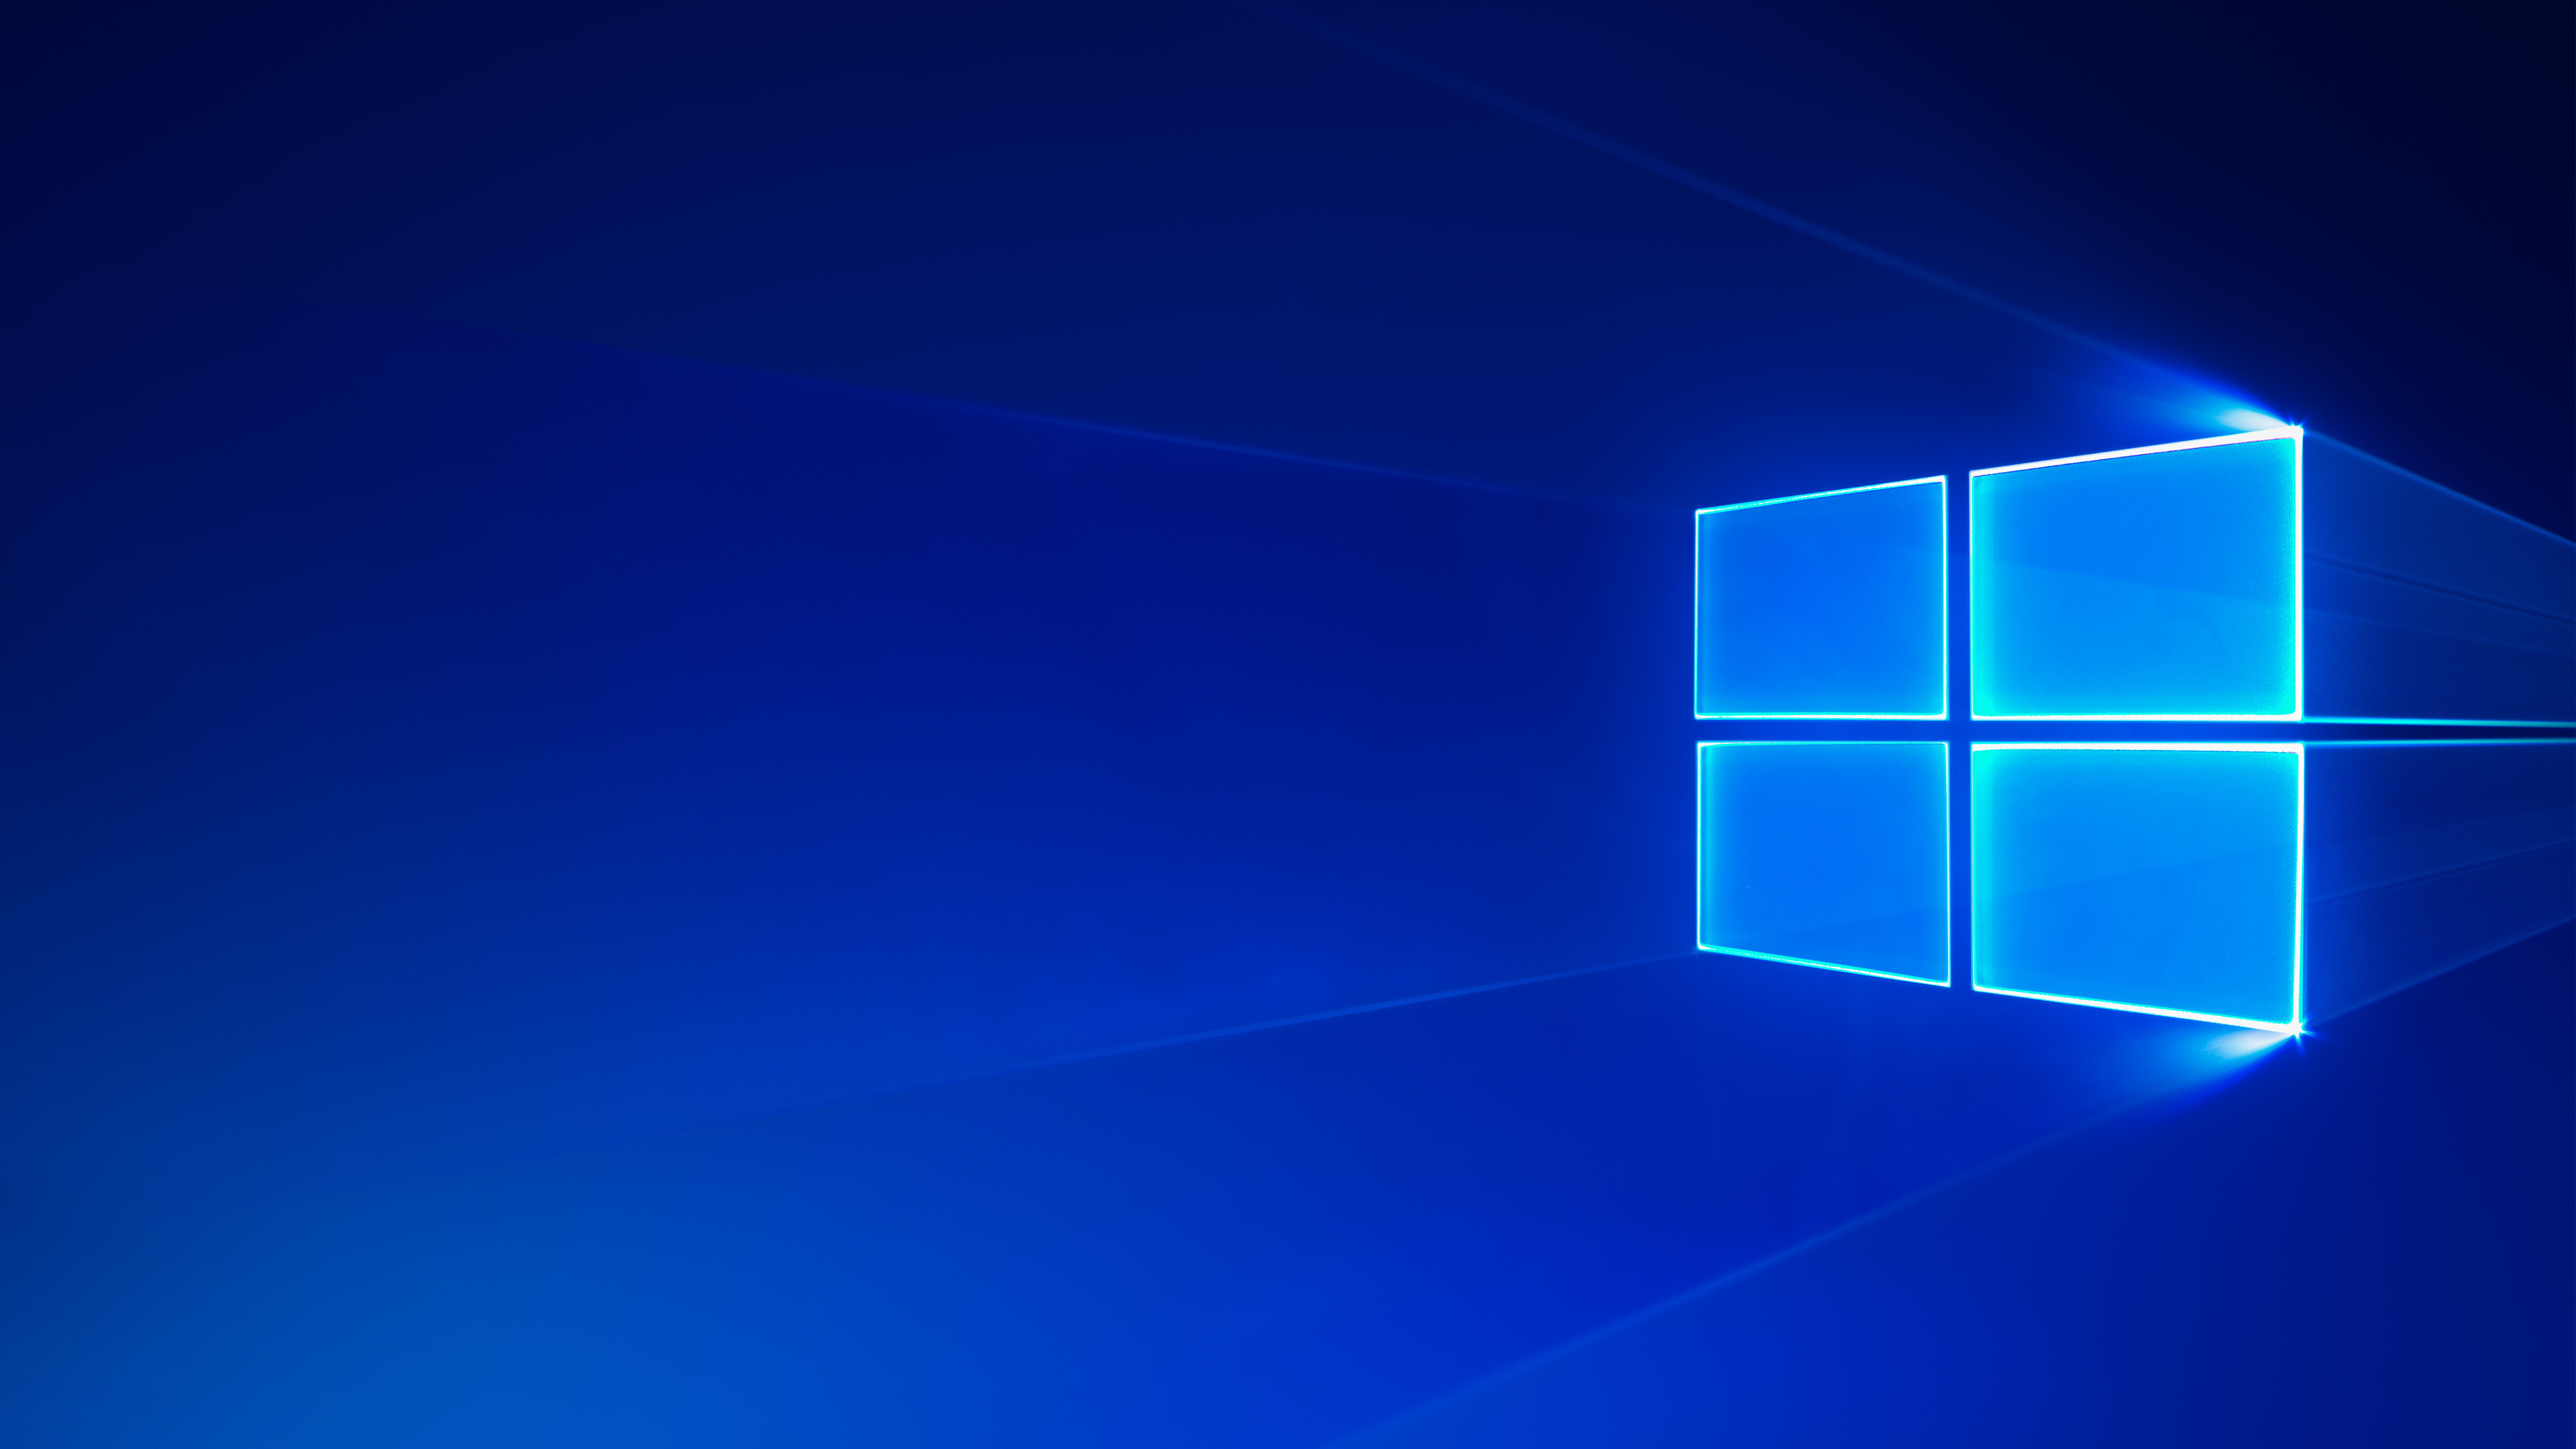 3840x2160 Enlarge / The Windows 10 S default wallpaper is a rather attractive  simplified version of the Windows 10 default wallpaper.